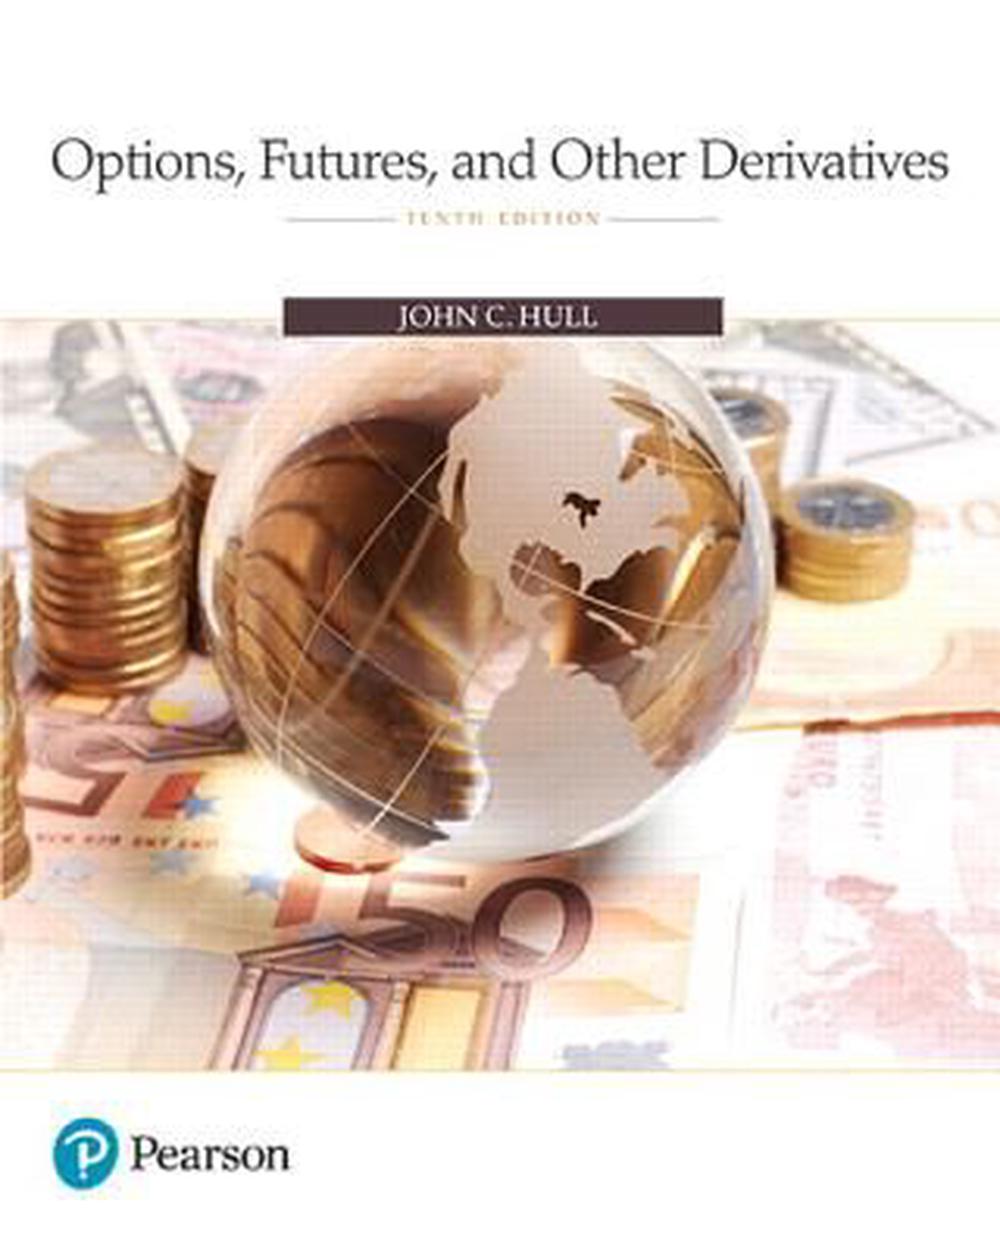 Options, Futures, and Other Derivatives 10th Edition PDF